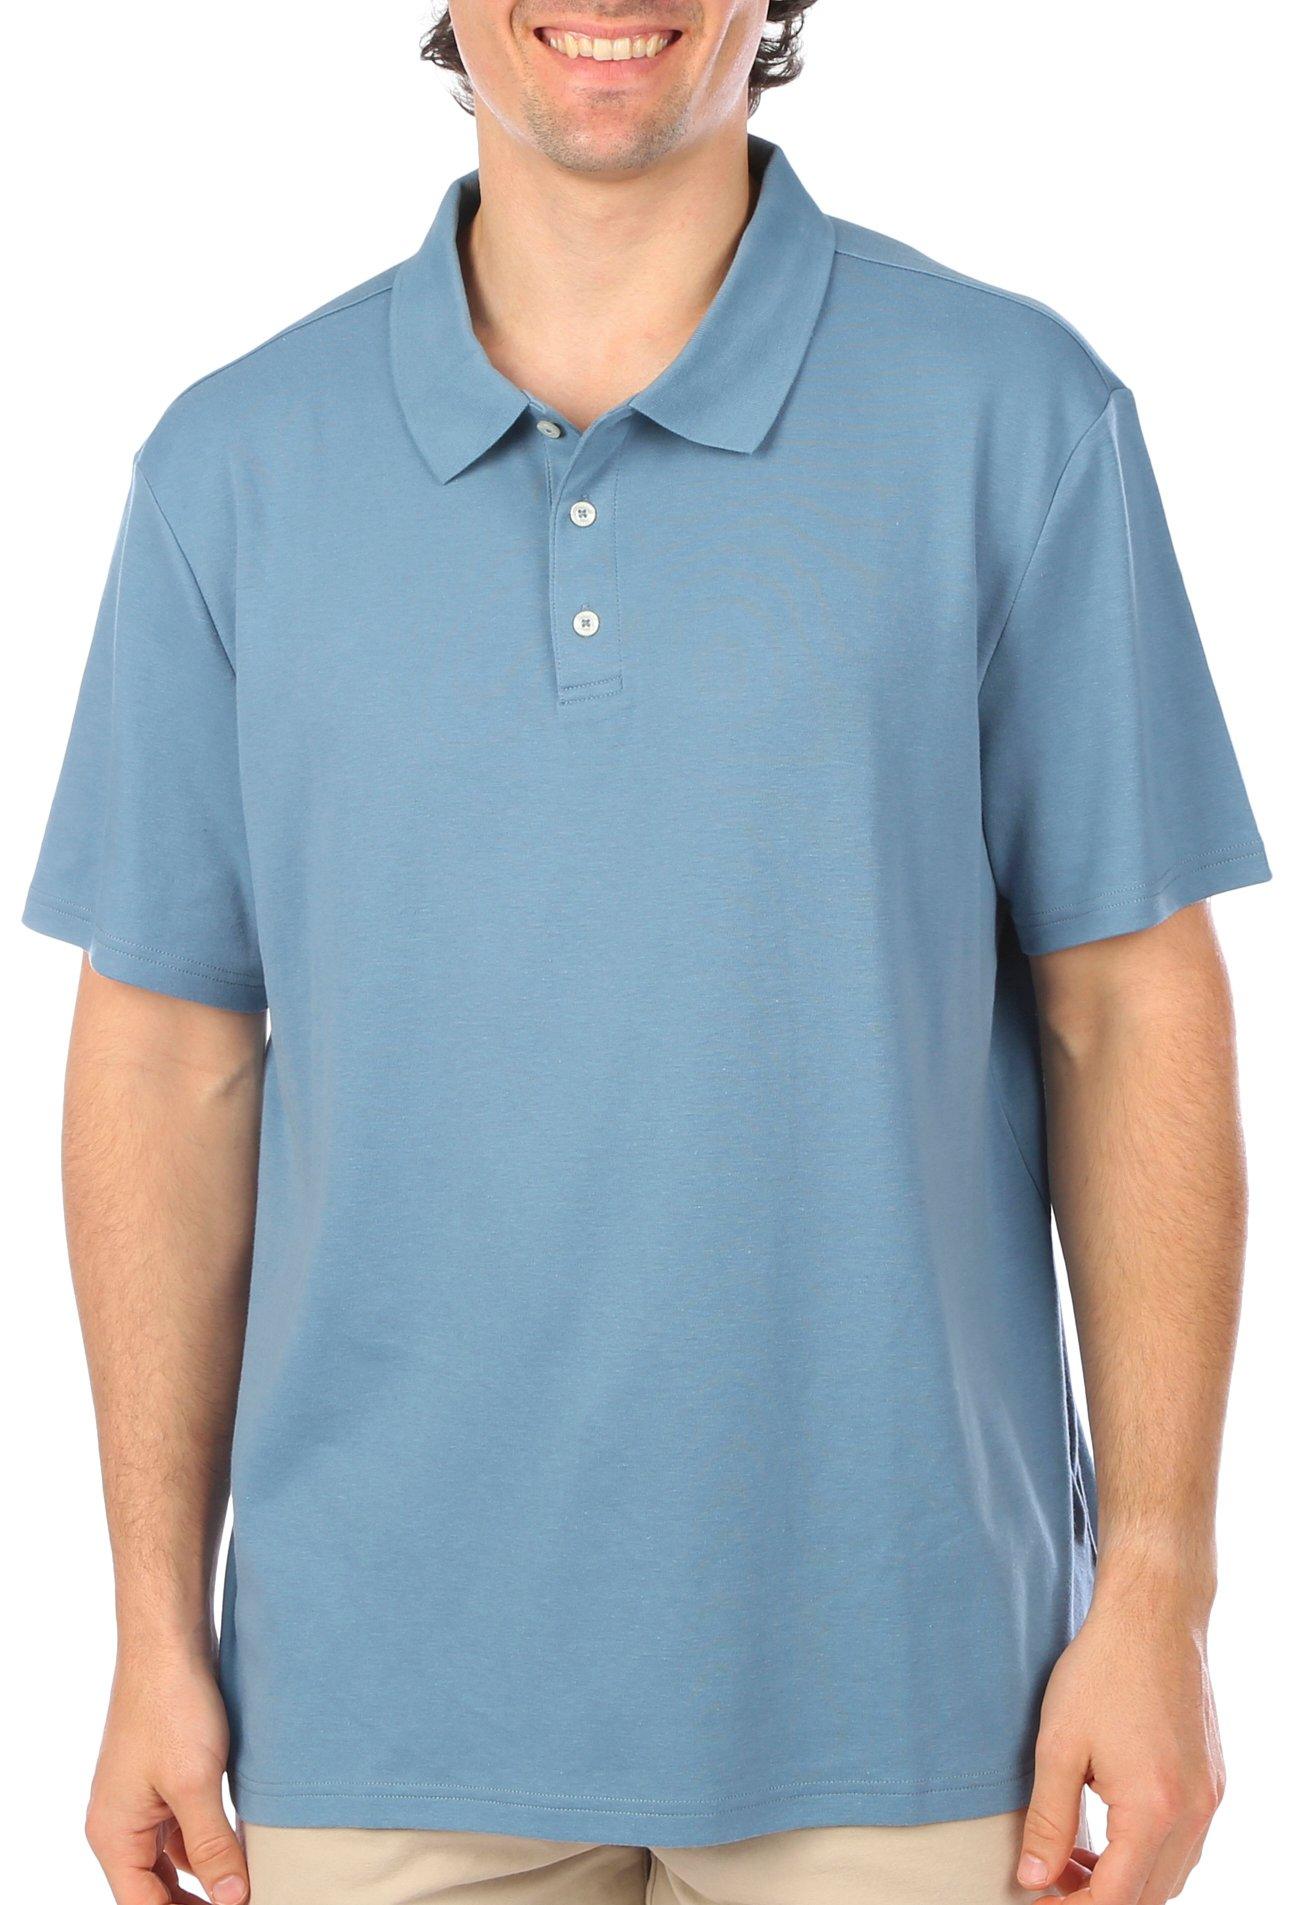 Mens Solid Short Sleeve Polo